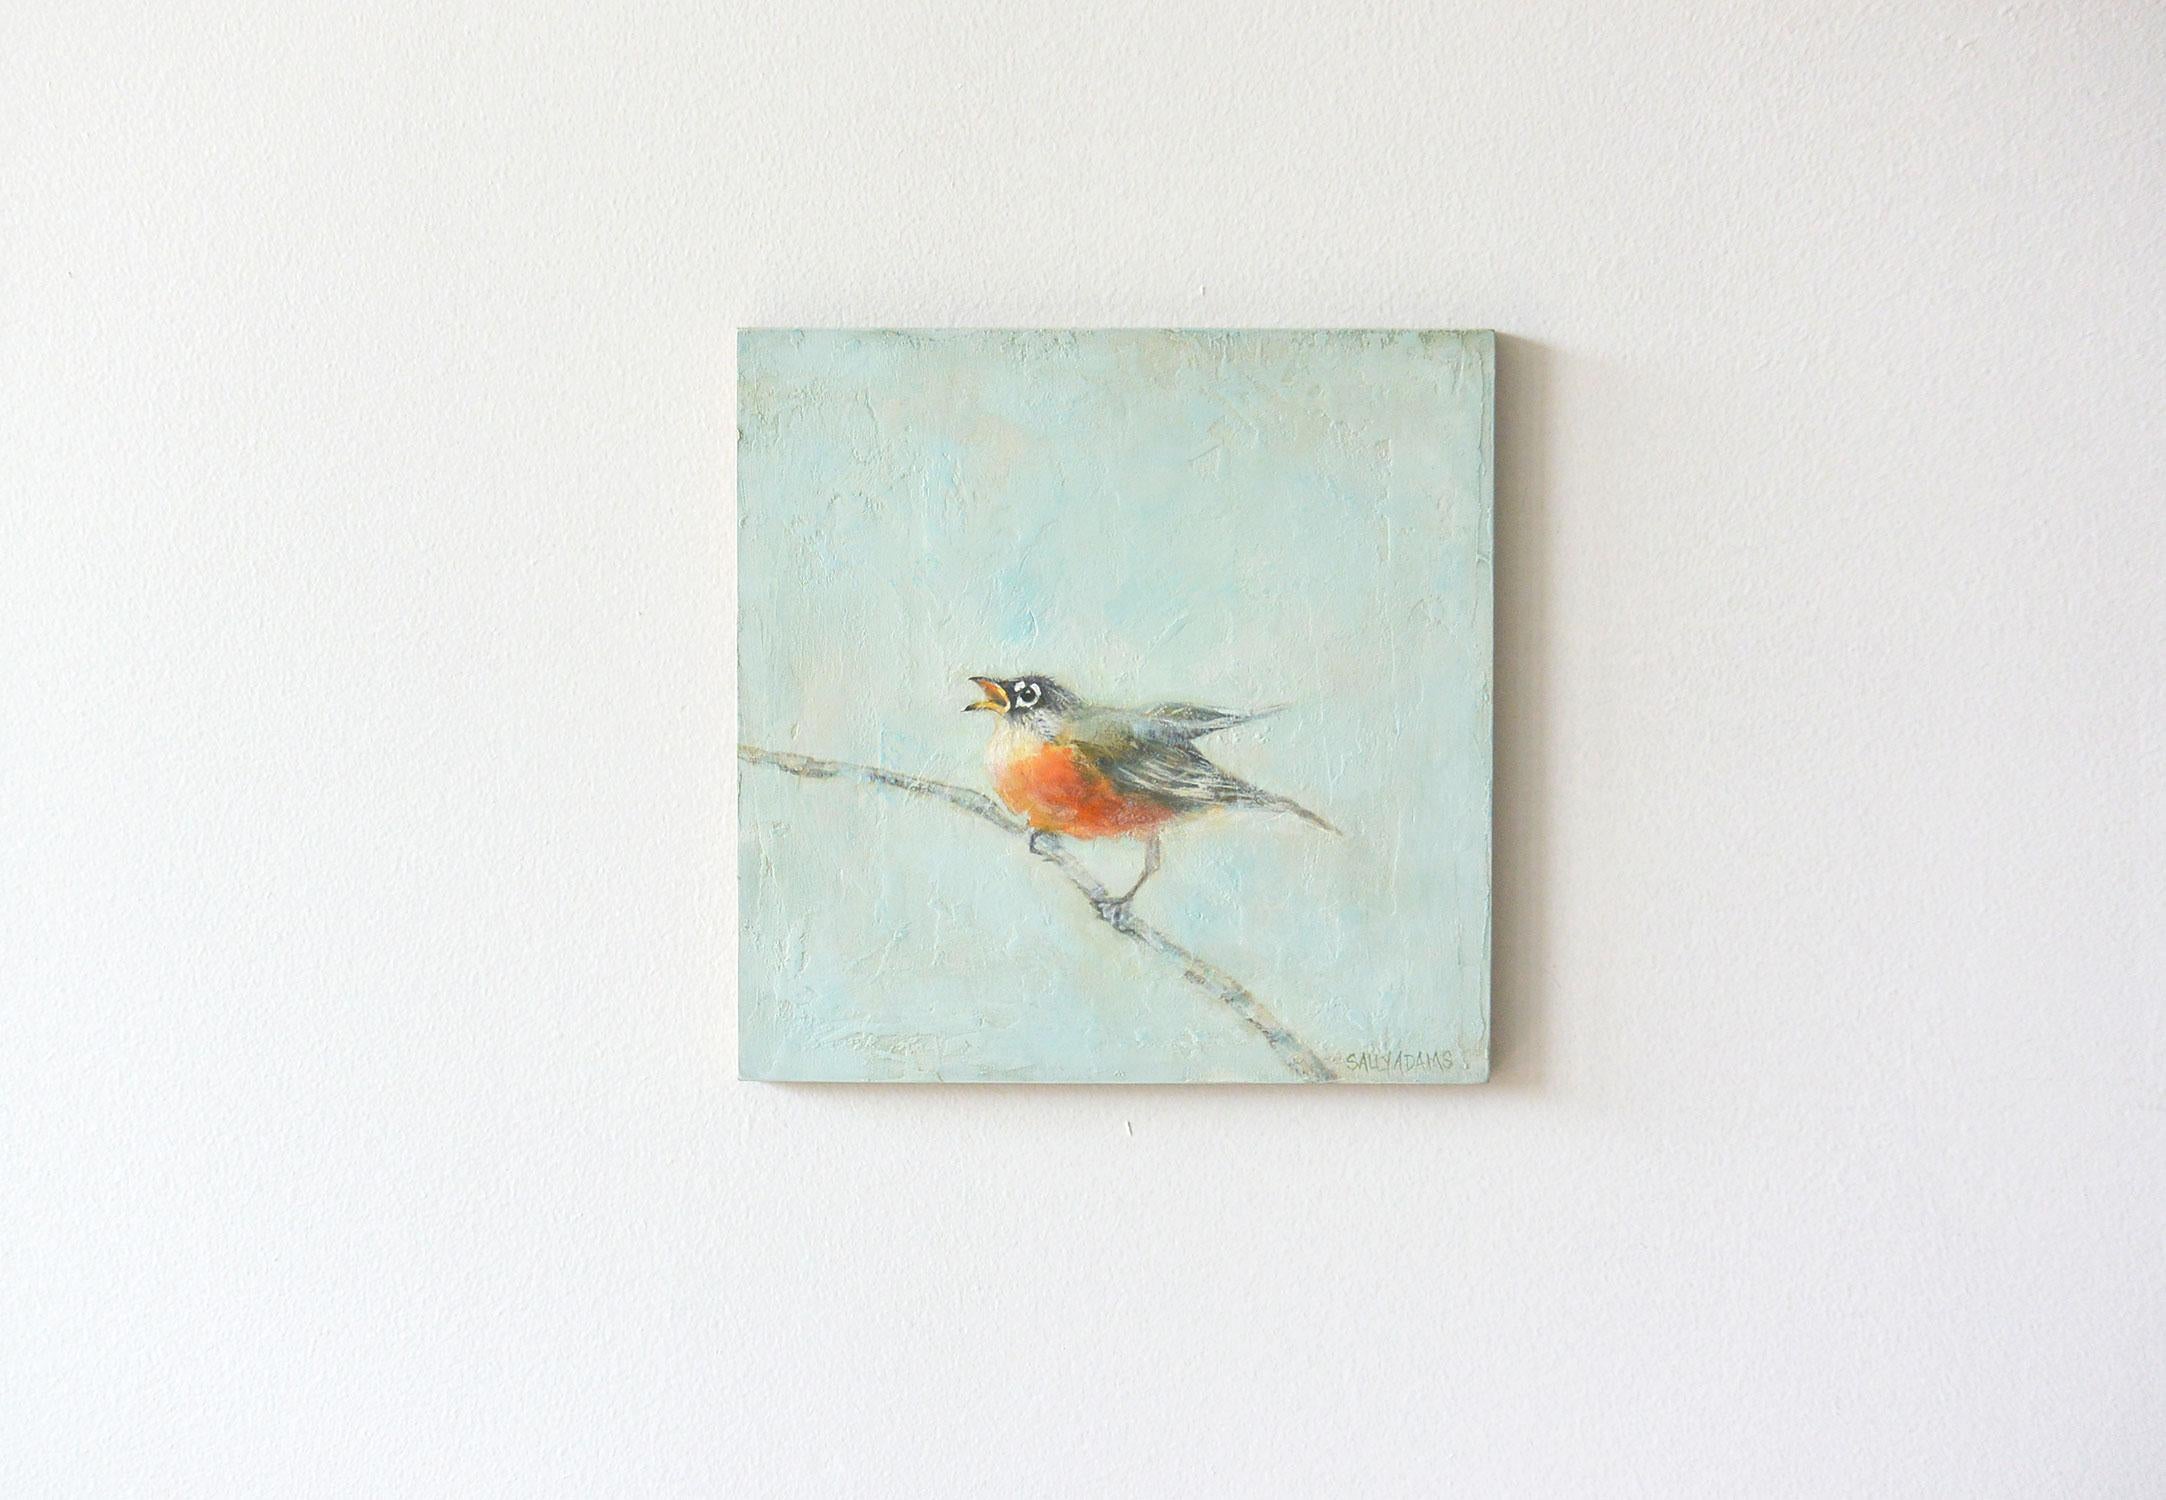 <p>Artist Comments<br />Part of a series of small scale works illustrating the birds near Sally's home. She says baby robins are one of her favorite sightings. 